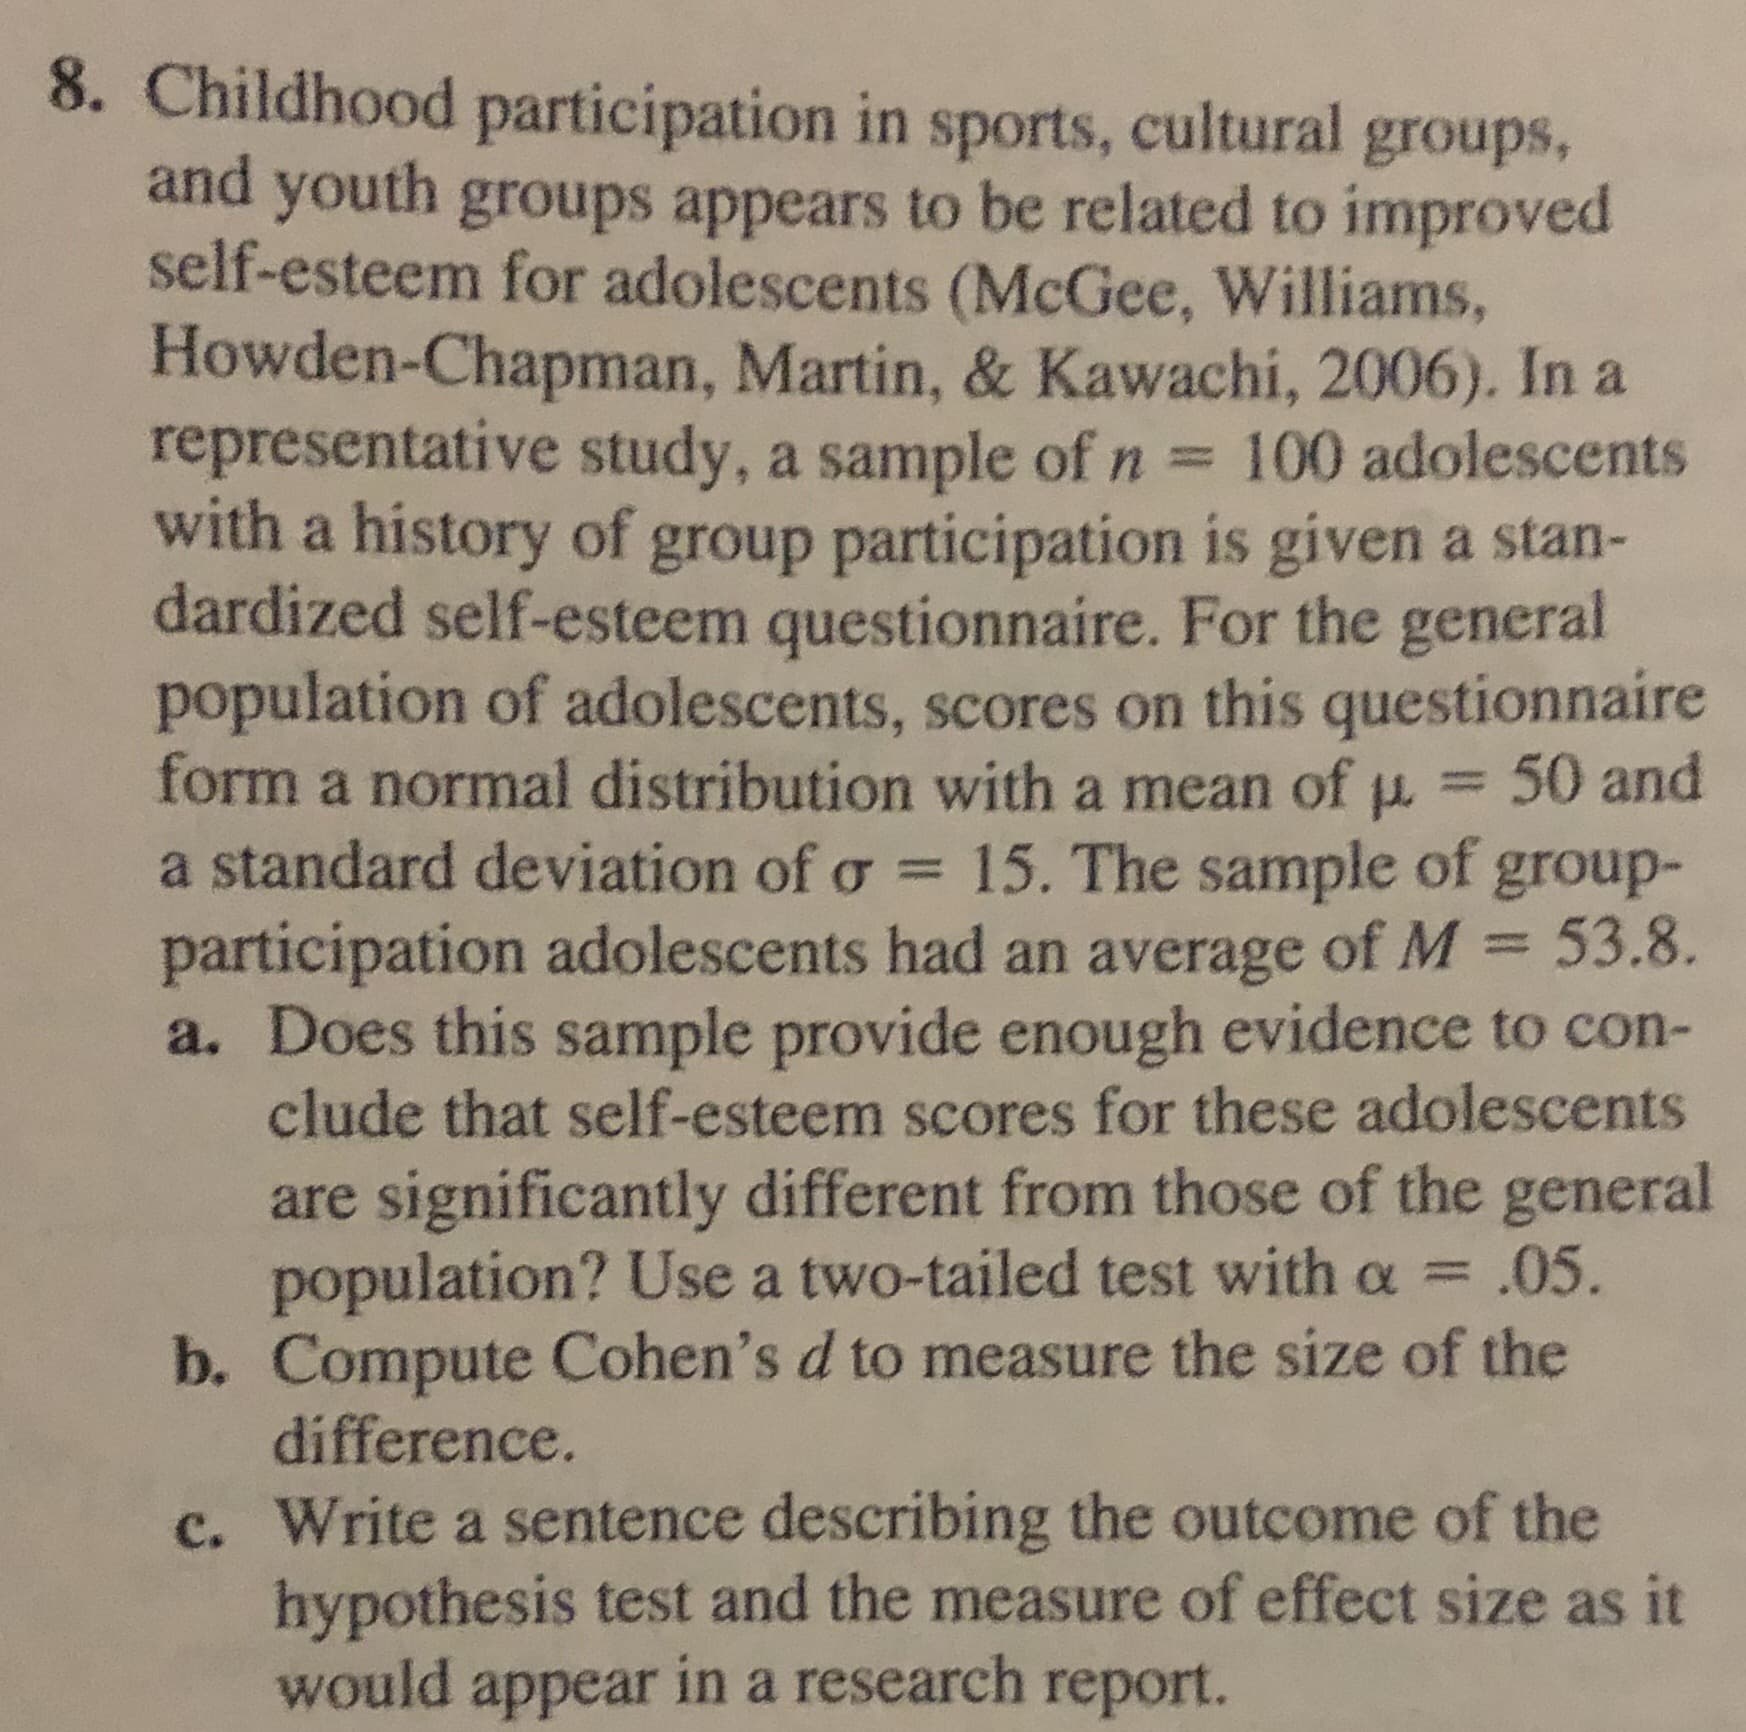 8. Childhood participation in sports, cultural groups,
and youth groups appears to be related to improved
self-esteem for adolescents (McGee, Williams,
Howden-Chapman, Martin, & Kawachi, 2006). In a
representative study, a sample of n 100 adolescents
with a history of group participation is given a stan-
dardized self-esteem questionnaire. For the general
population of adolescents, scores on this questionnaire
form a normal distribution with a mean of p. = 50 and
a standard deviation of o = 15. The sample of group-
participation adolescents had an average of M = 53.8.
a. Does this sample provide enough evidence to con-
clude that self-esteem scores for these adolescents
%3D
%3D
are significantly different from those of the general
population? Use a two-tailed test with a =
b. Compute Cohen's d to measure the size of the
difference.
.05.
c. Write a sentence describing the outcome of the
hypothesis test and the measure of effect size as it
would appear in a research report.
